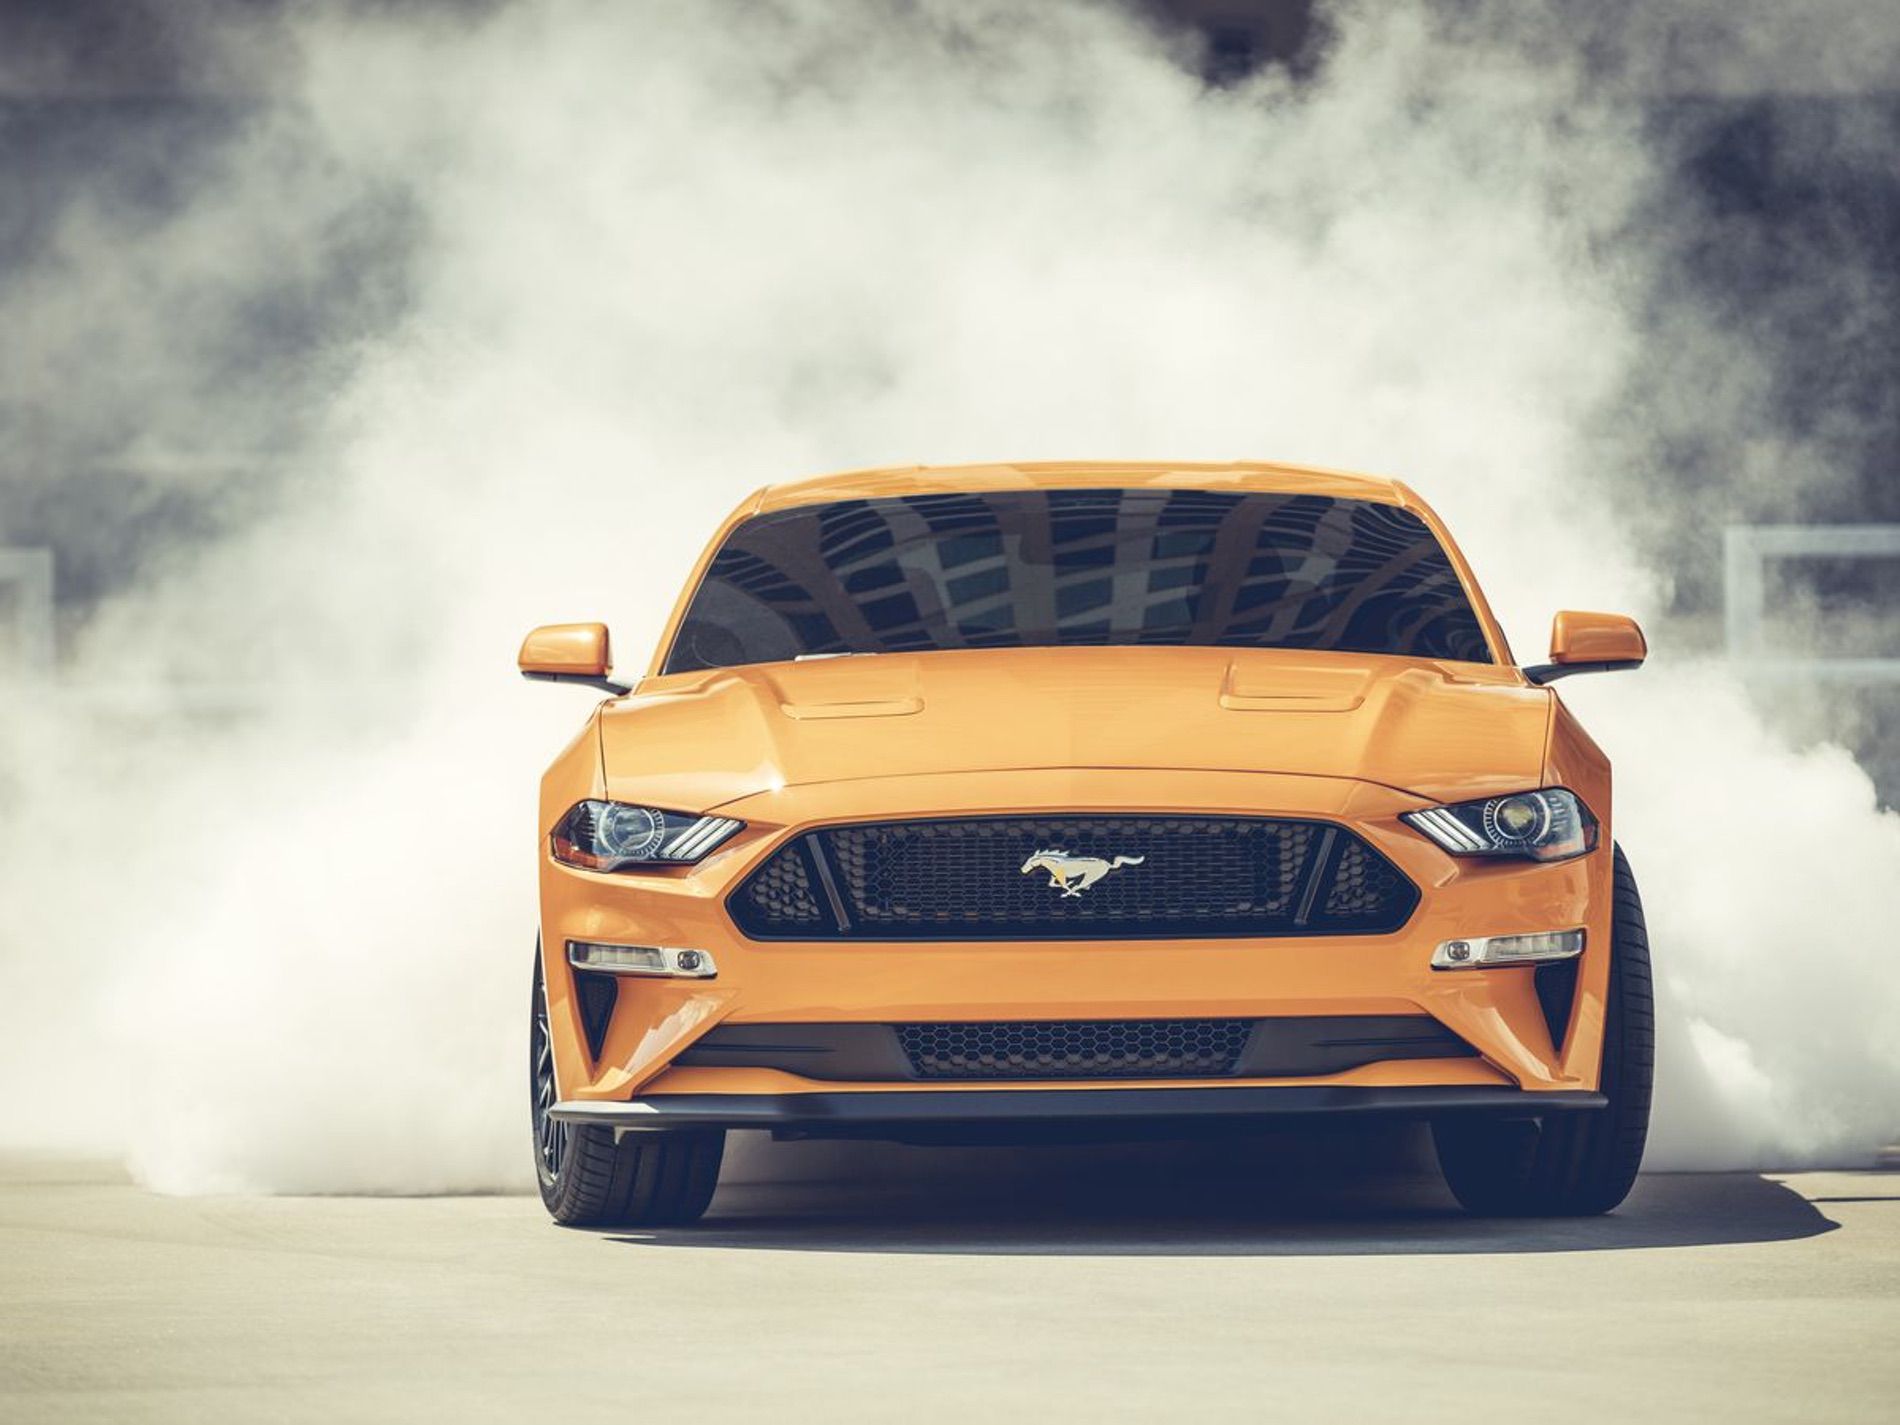 Ford Mustang accelerating on track